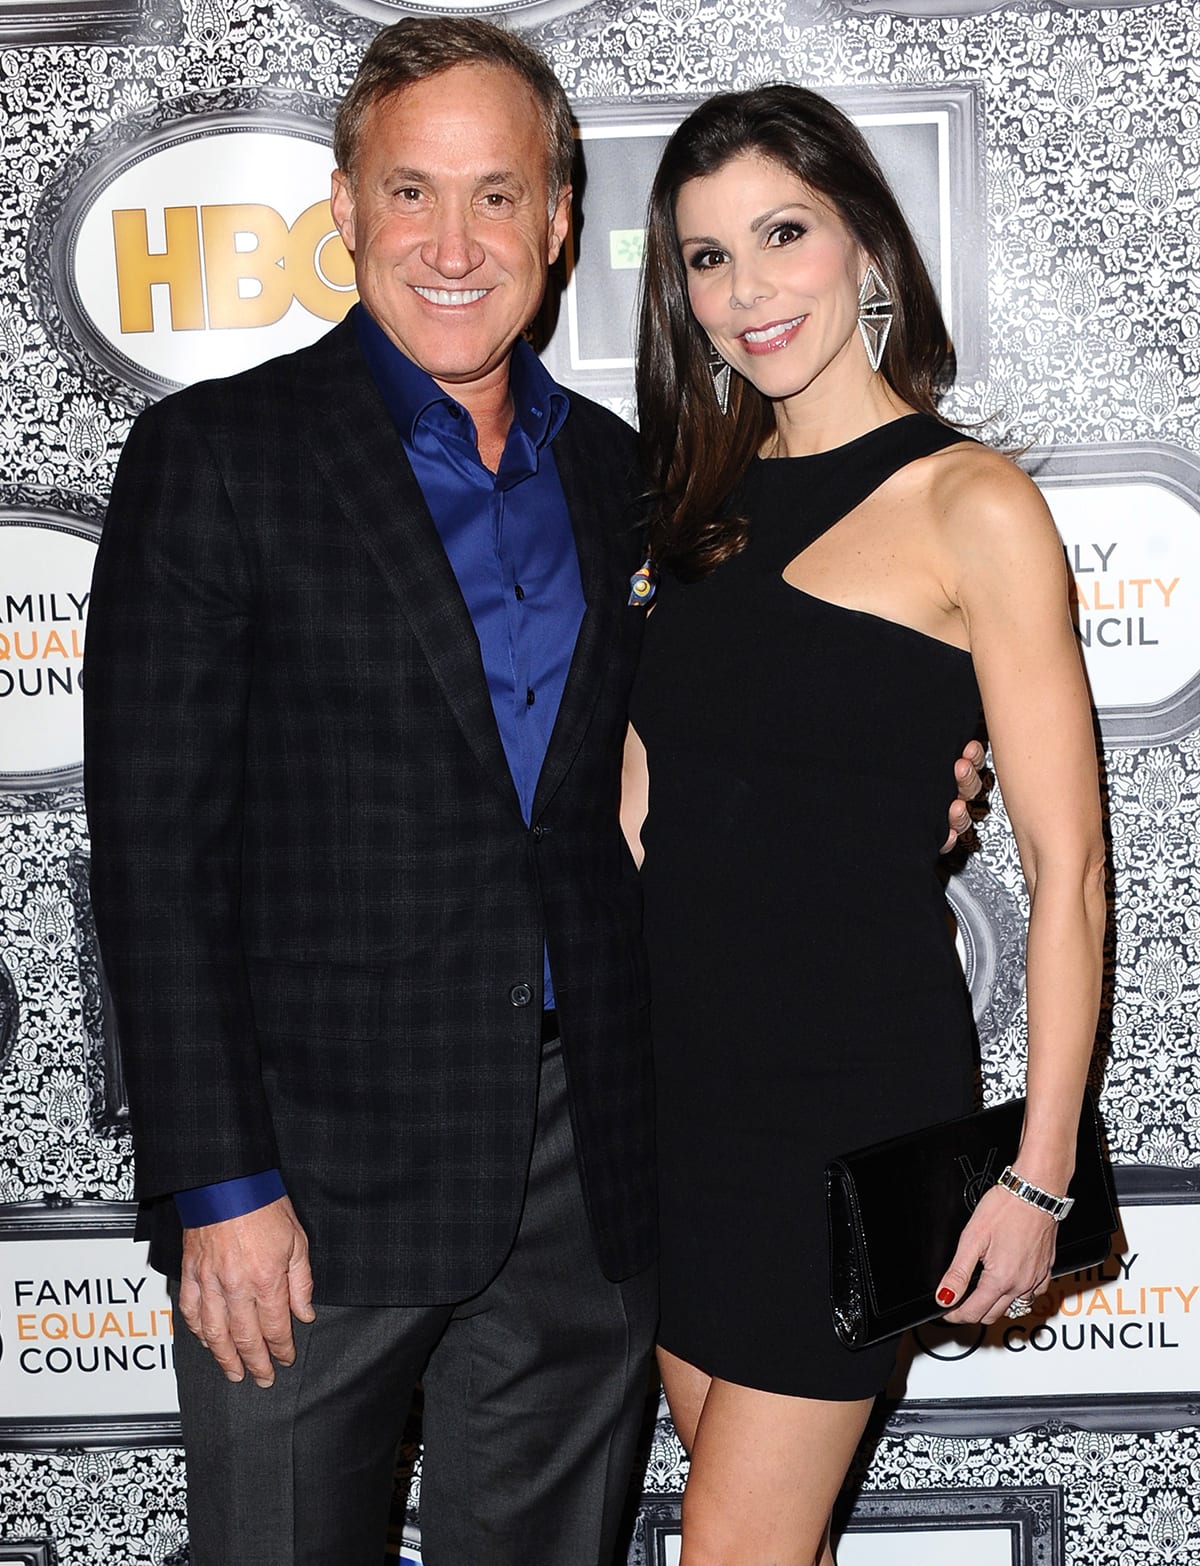 Heather Dubrow initially thought Terry wasn't exactly her cup of tea until frequent phone conversations made her fall for him